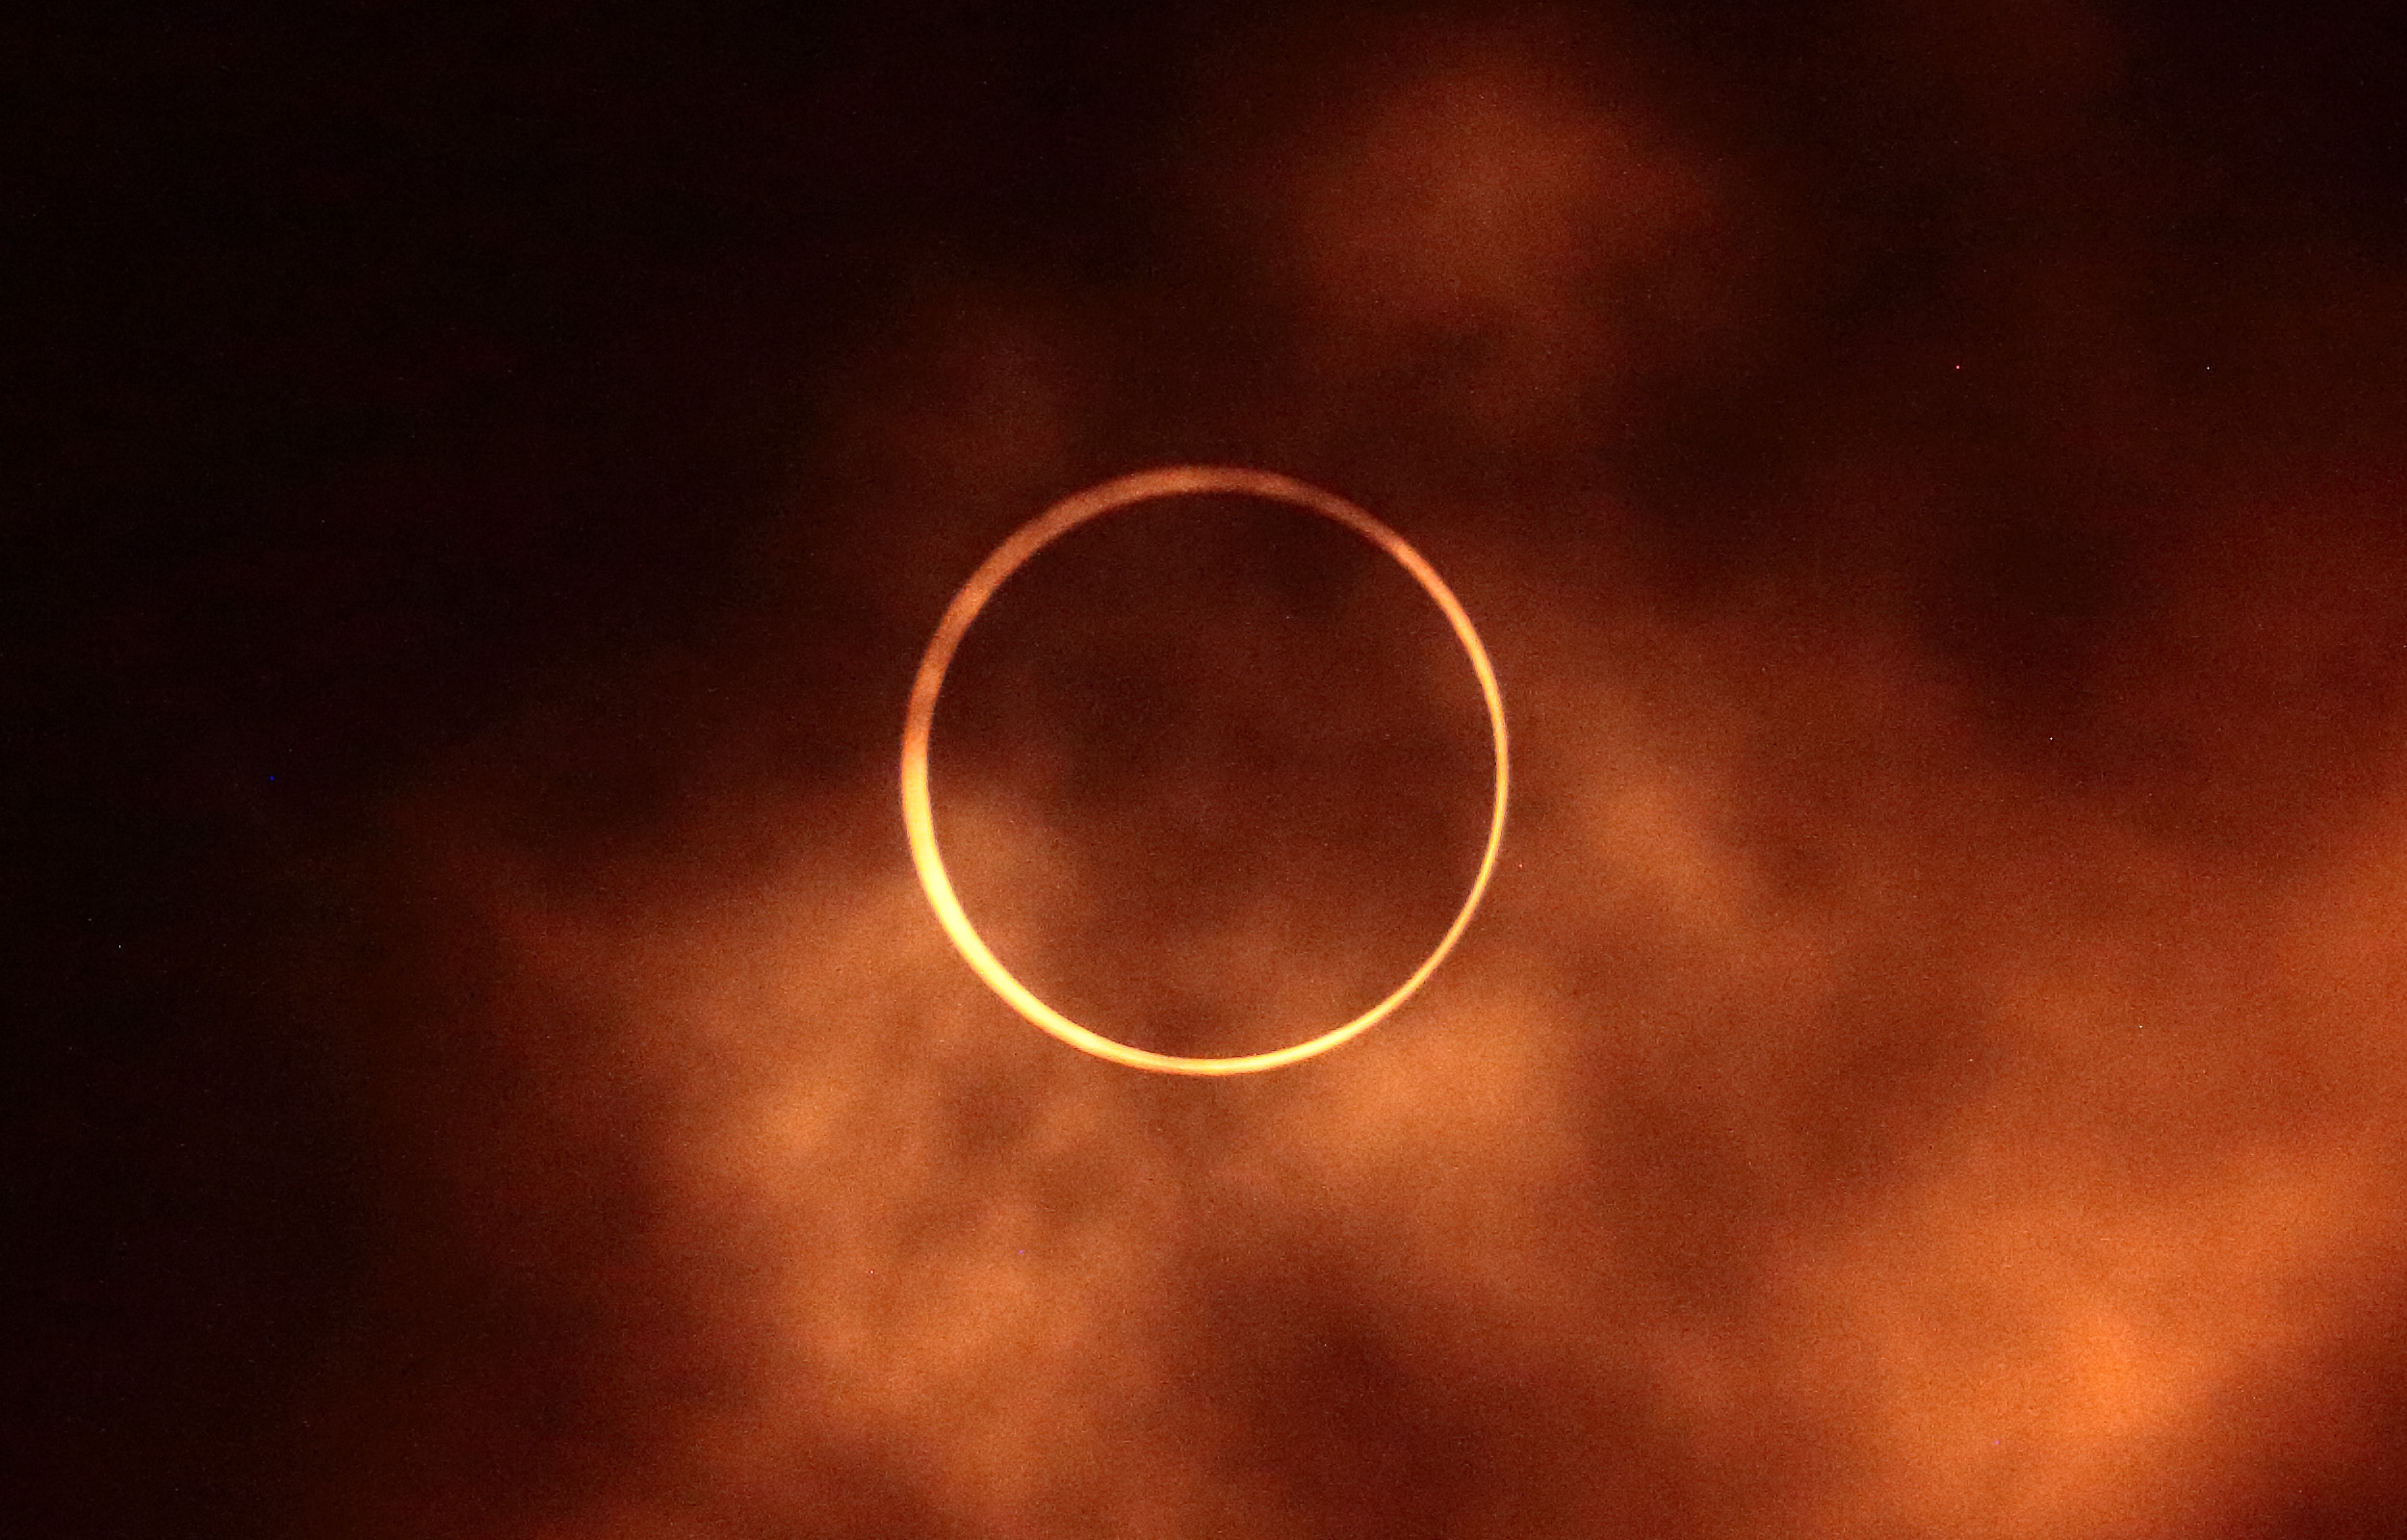 Annular Eclipse (Ring of Fire) with "fiery" clouds surrounding it.